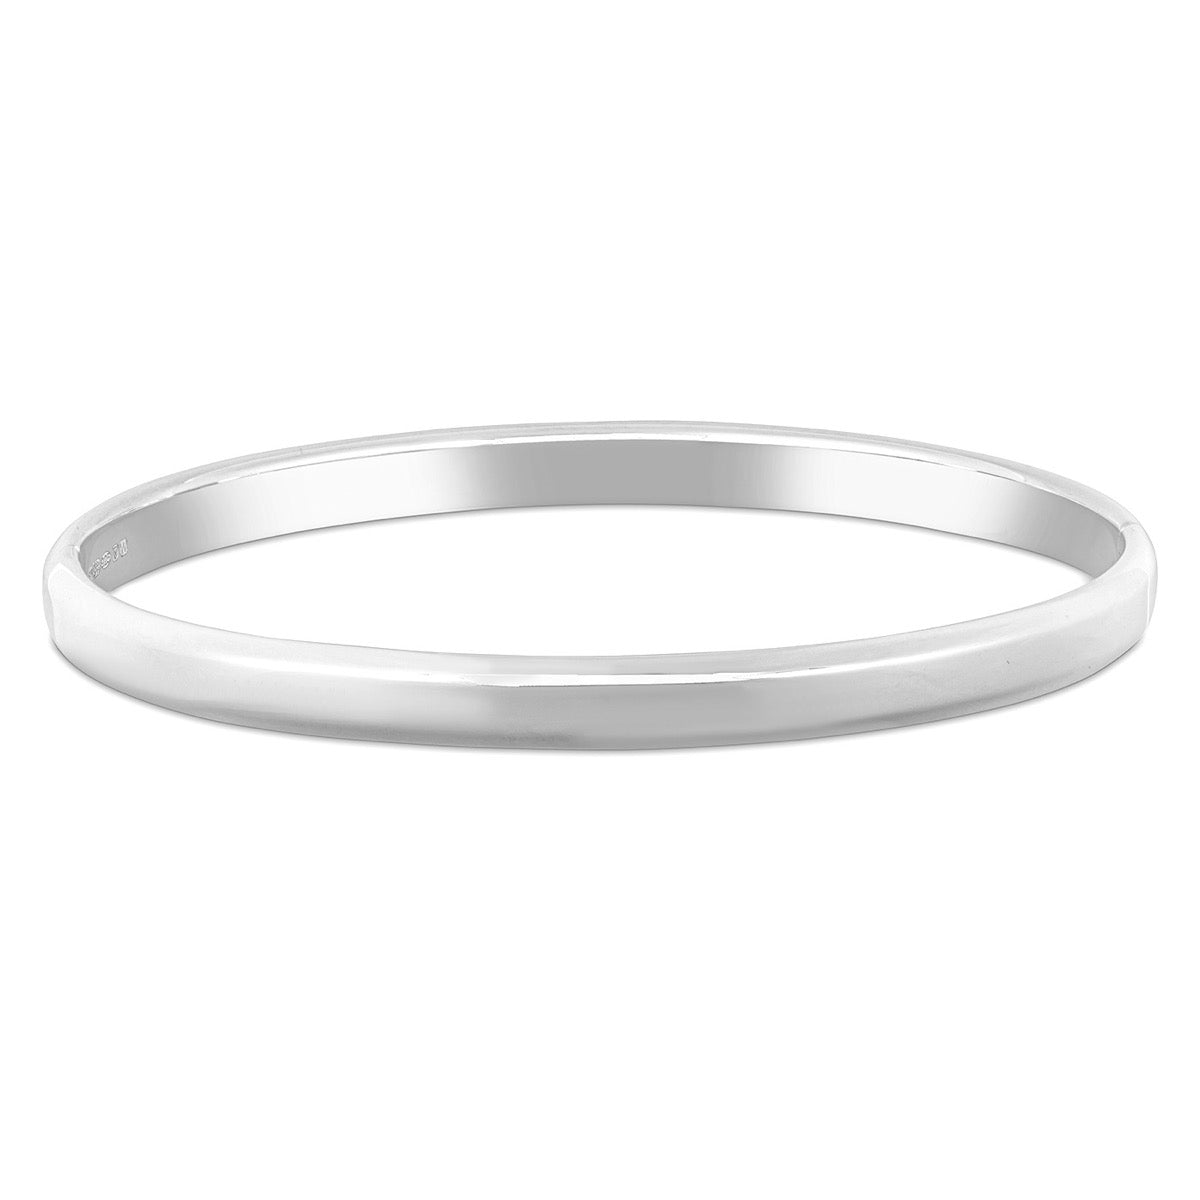 Oval Hinged Silver Bangle 6mm